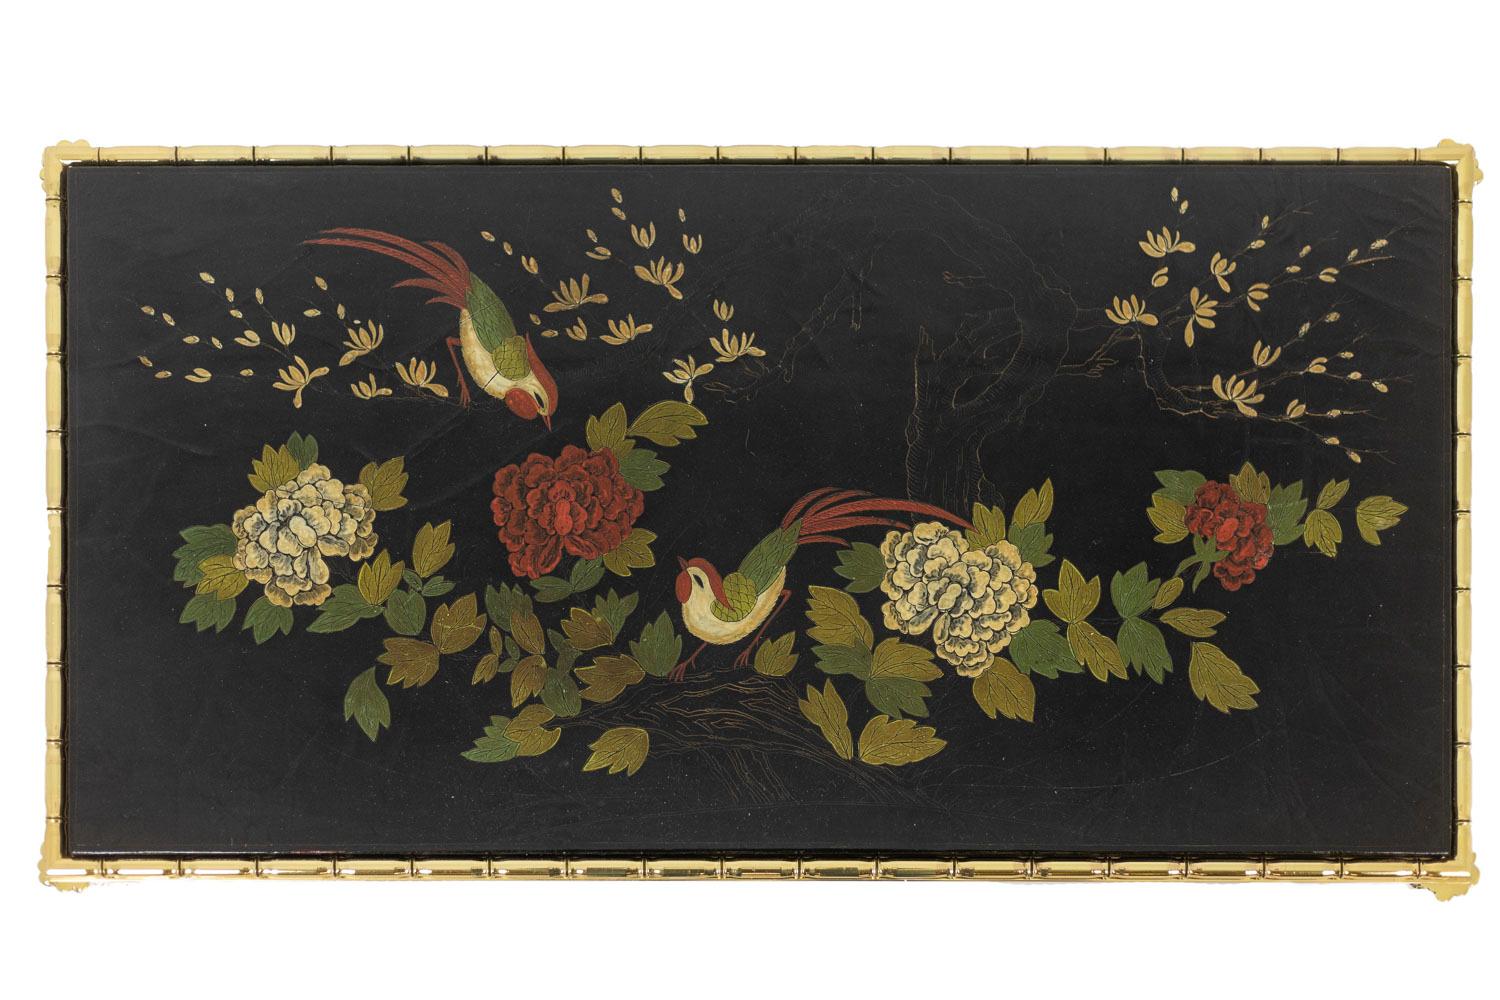 Maison Baguès, by.

Coffee table. Lacquer trays with floral decoration in black and red tones, resting on its bronze base ending in the upper part with thin palm leaves.

French work realized in the 1950s.